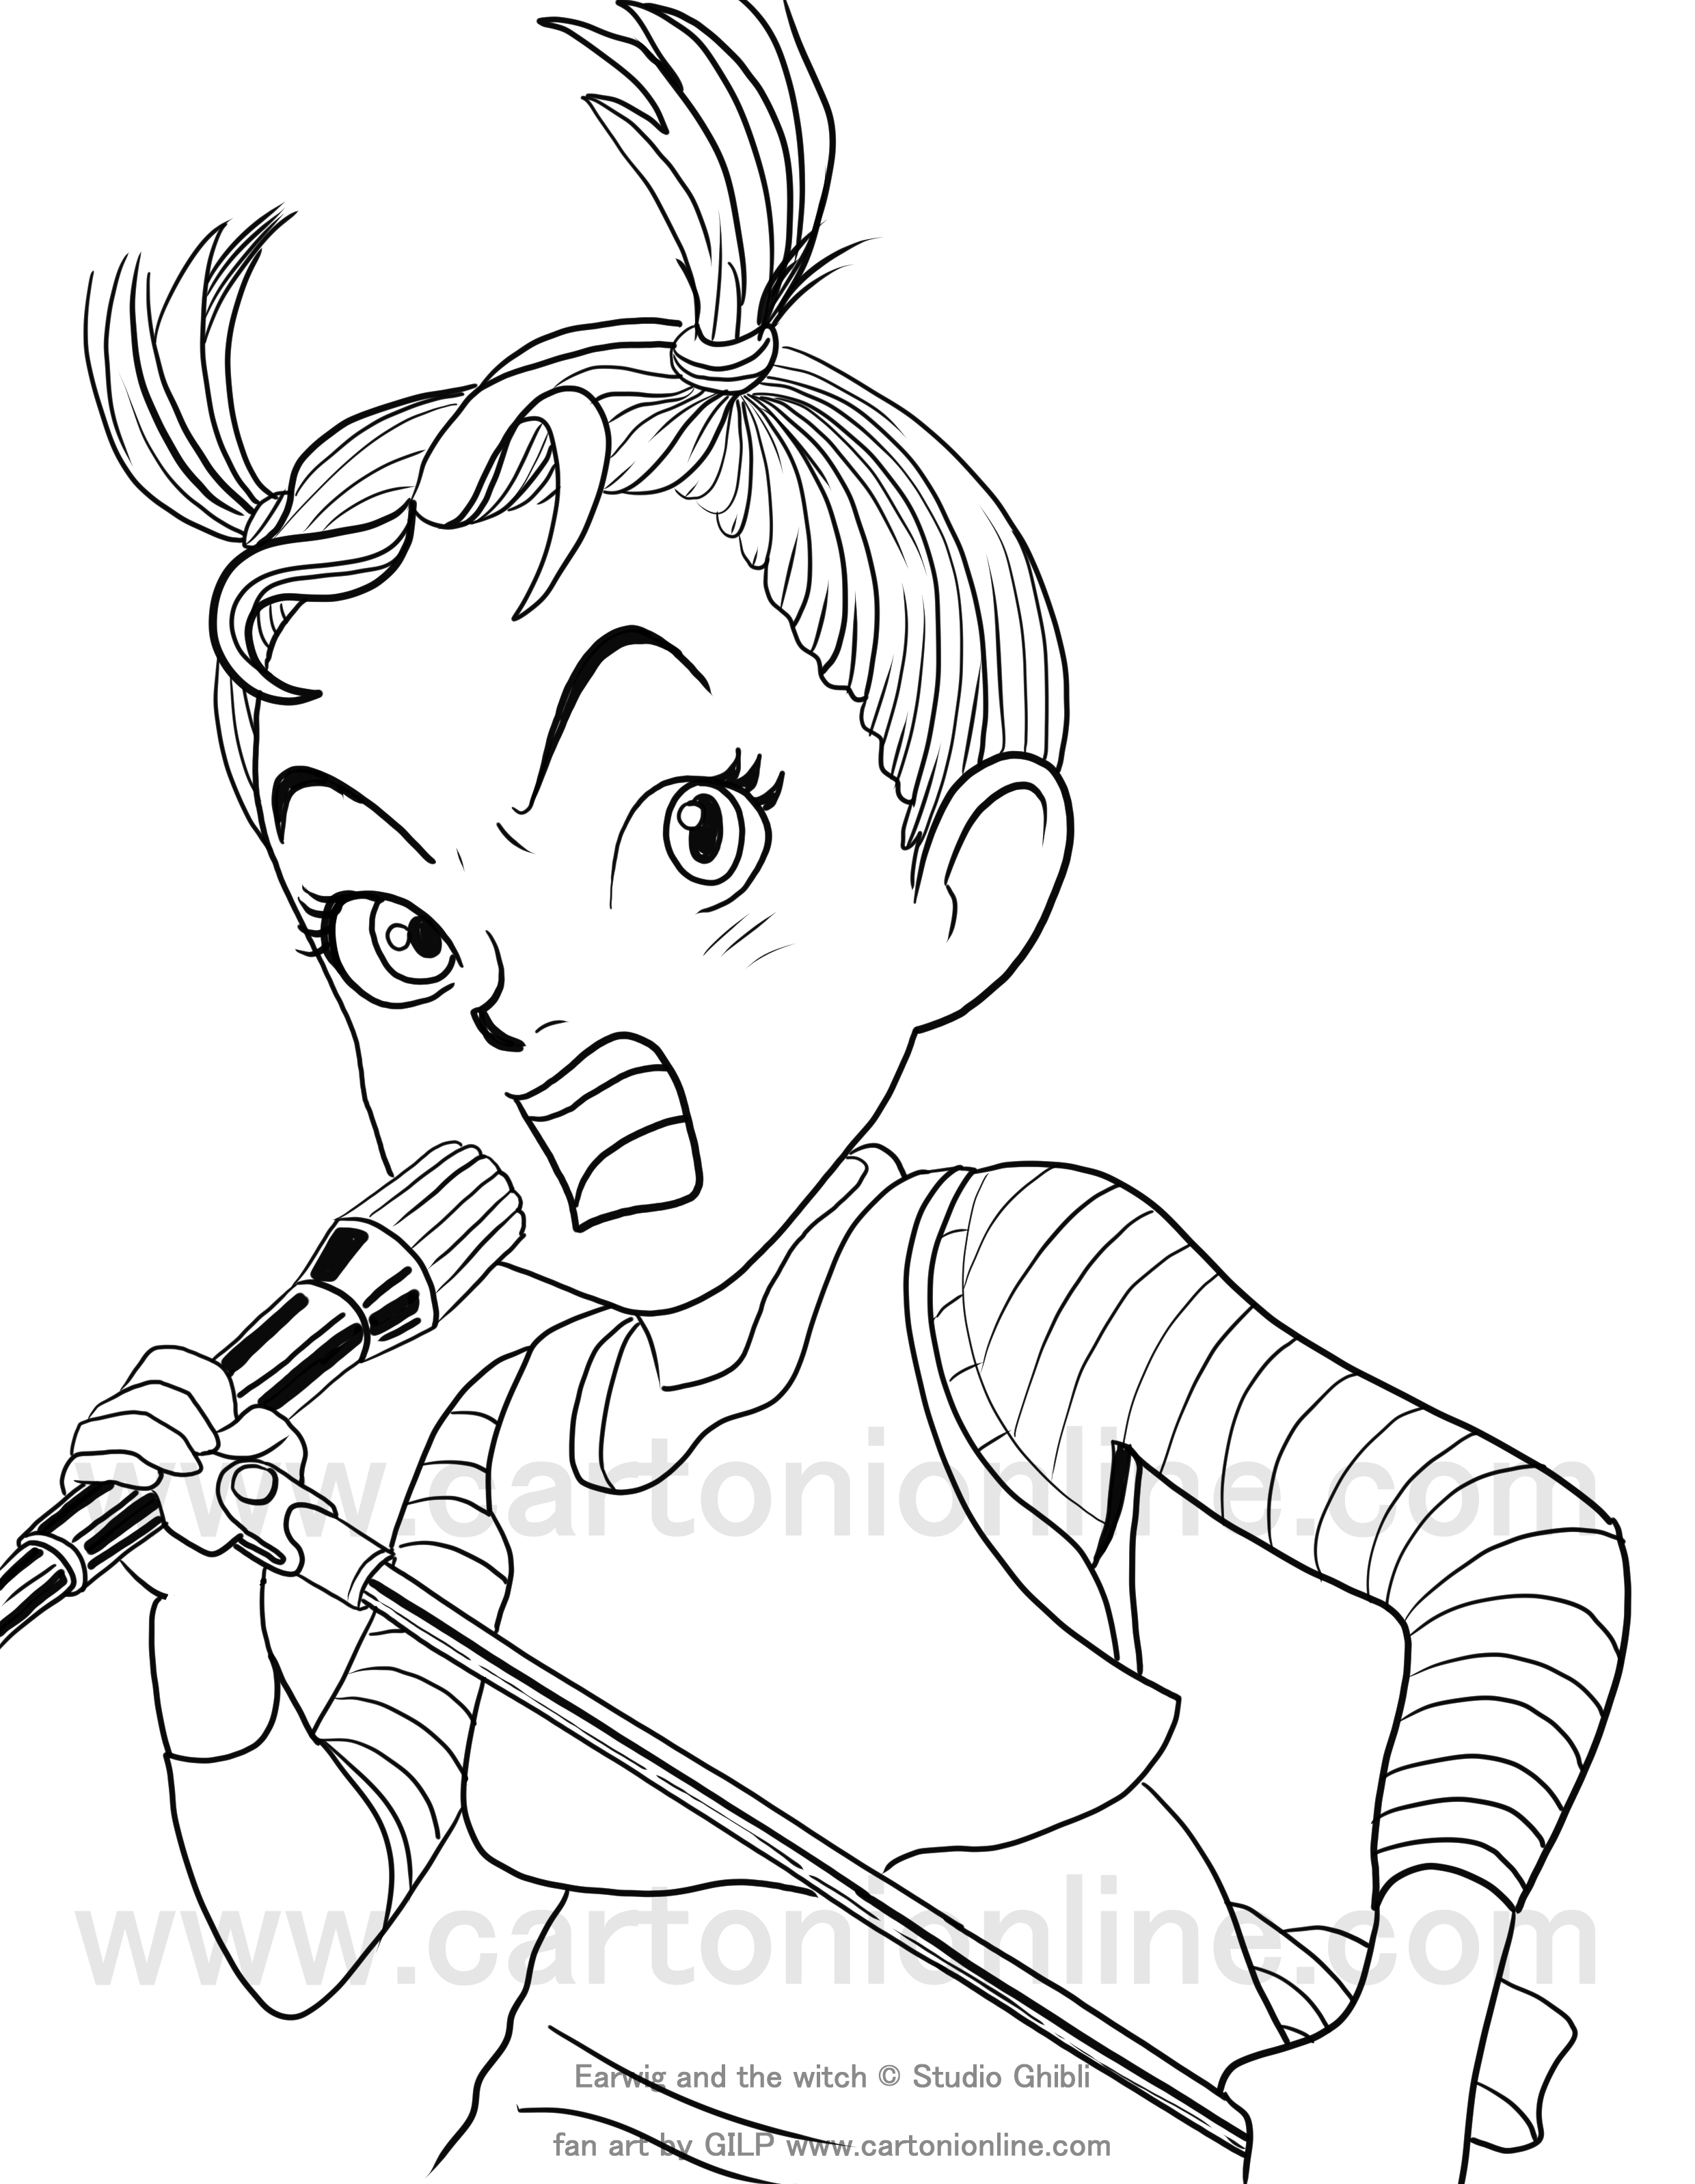 Earwig from Earwig and the witch coloring page to print and coloring